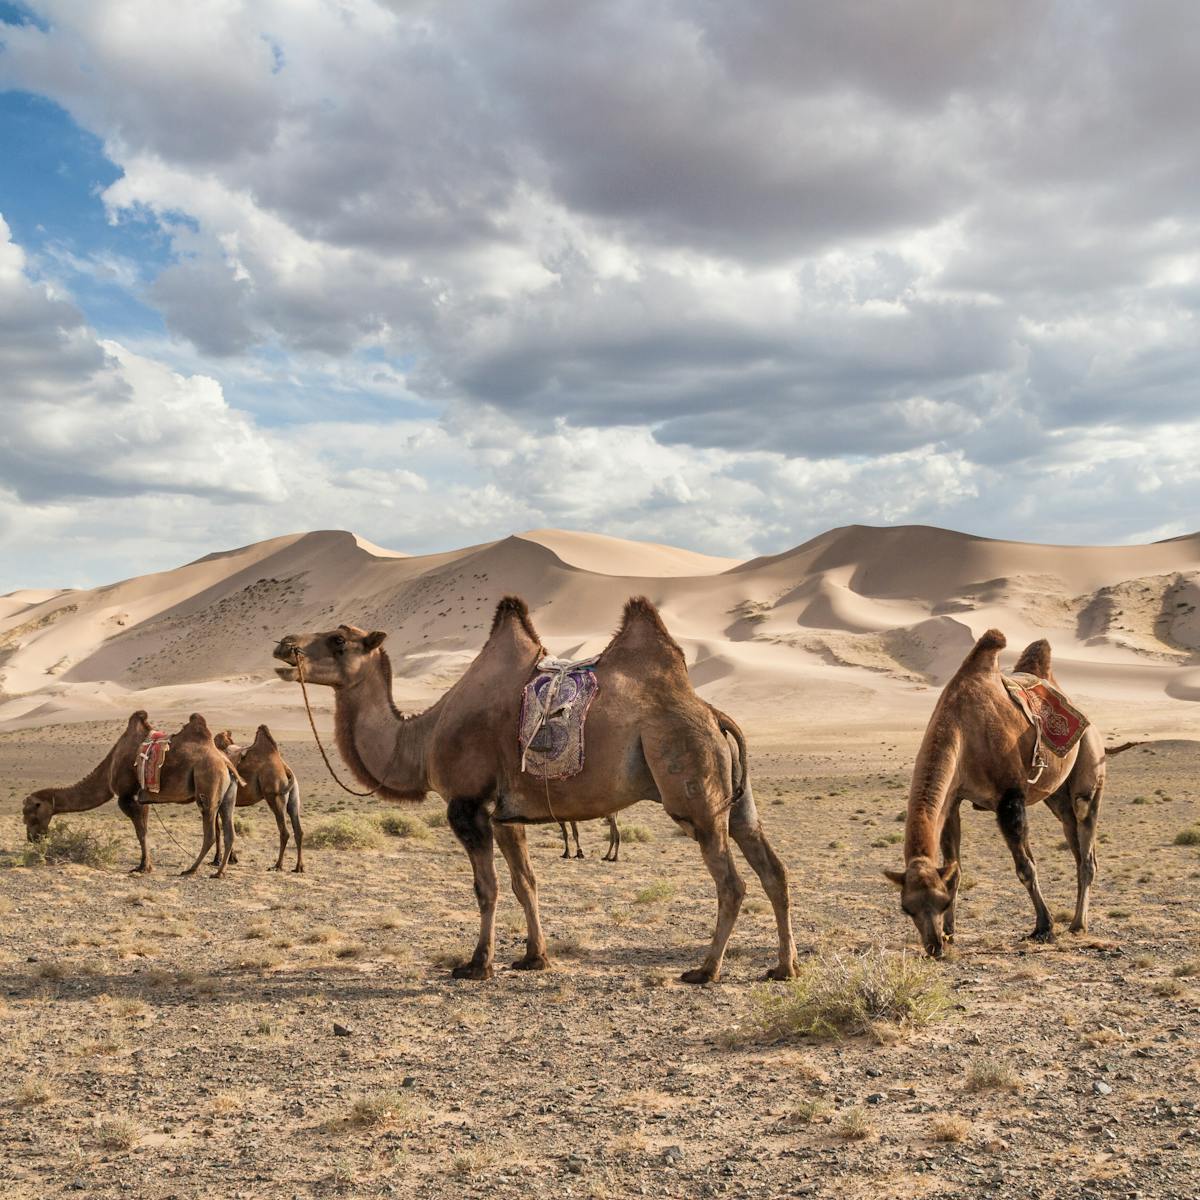 Central Asia risks becoming a hyperarid desert in the near future